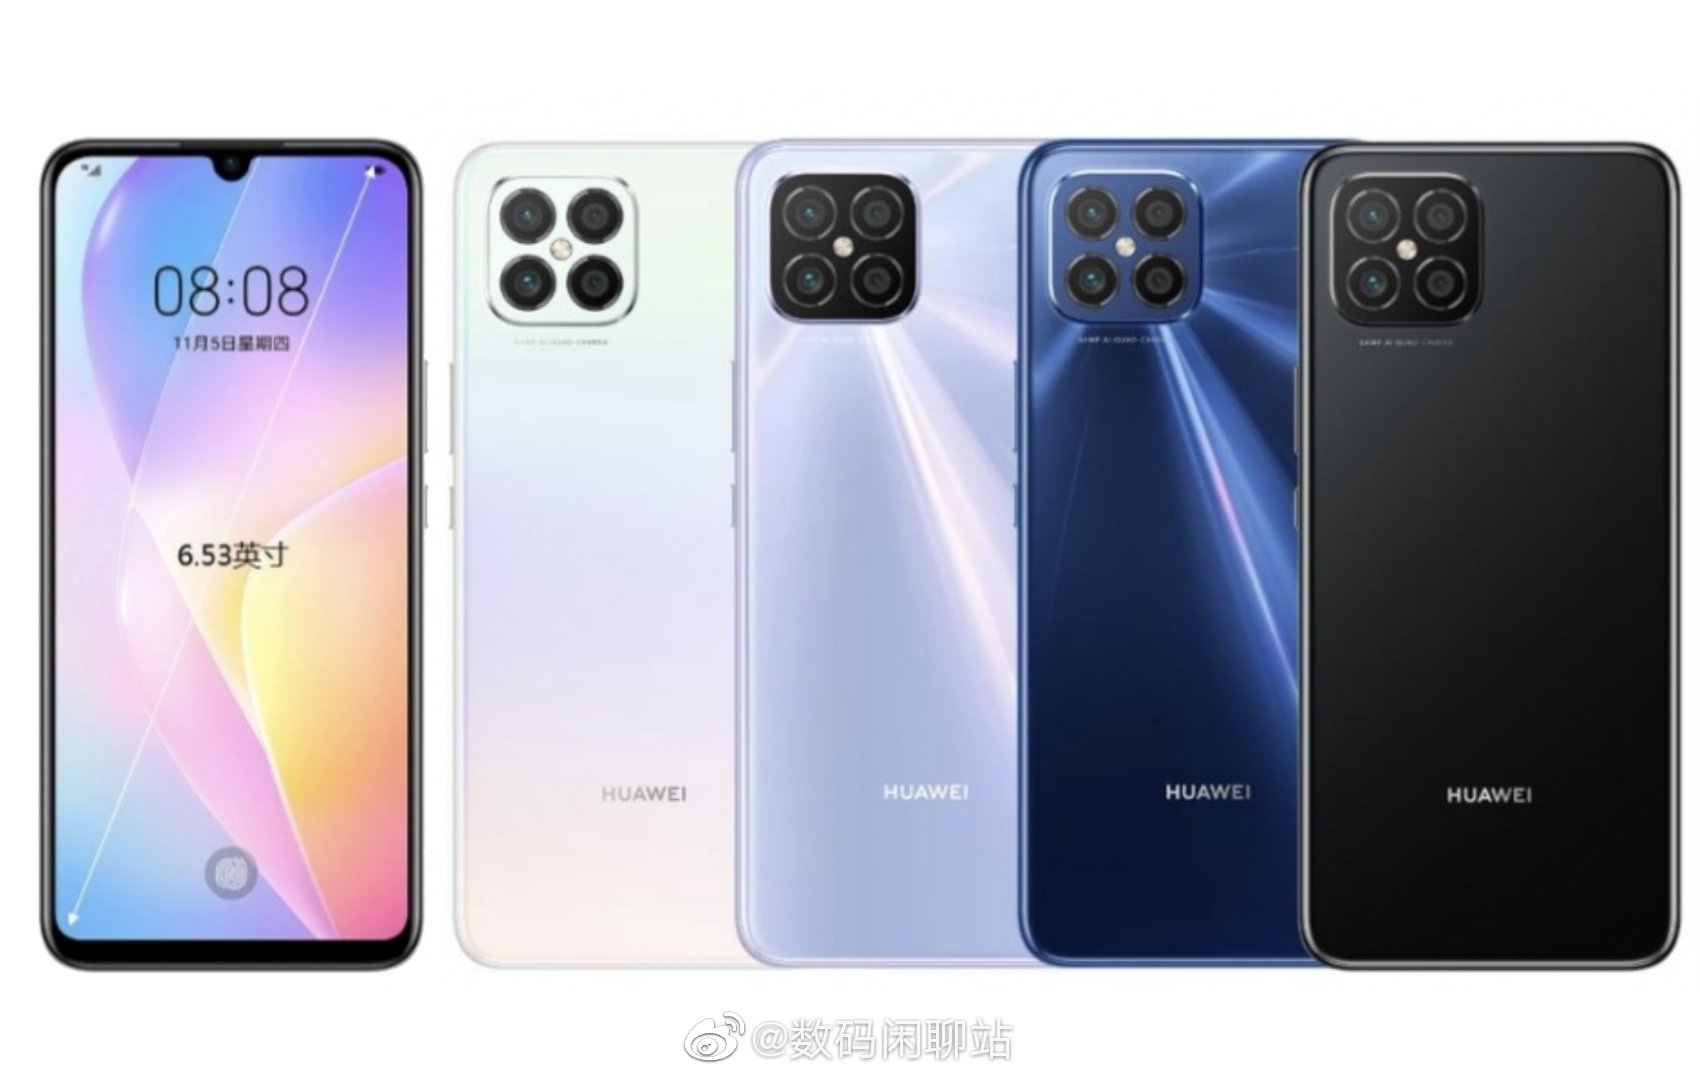 Alleged Huawei Nova 8 SE with Dimensity 720 and 8GB RAM emerges on Geekbench